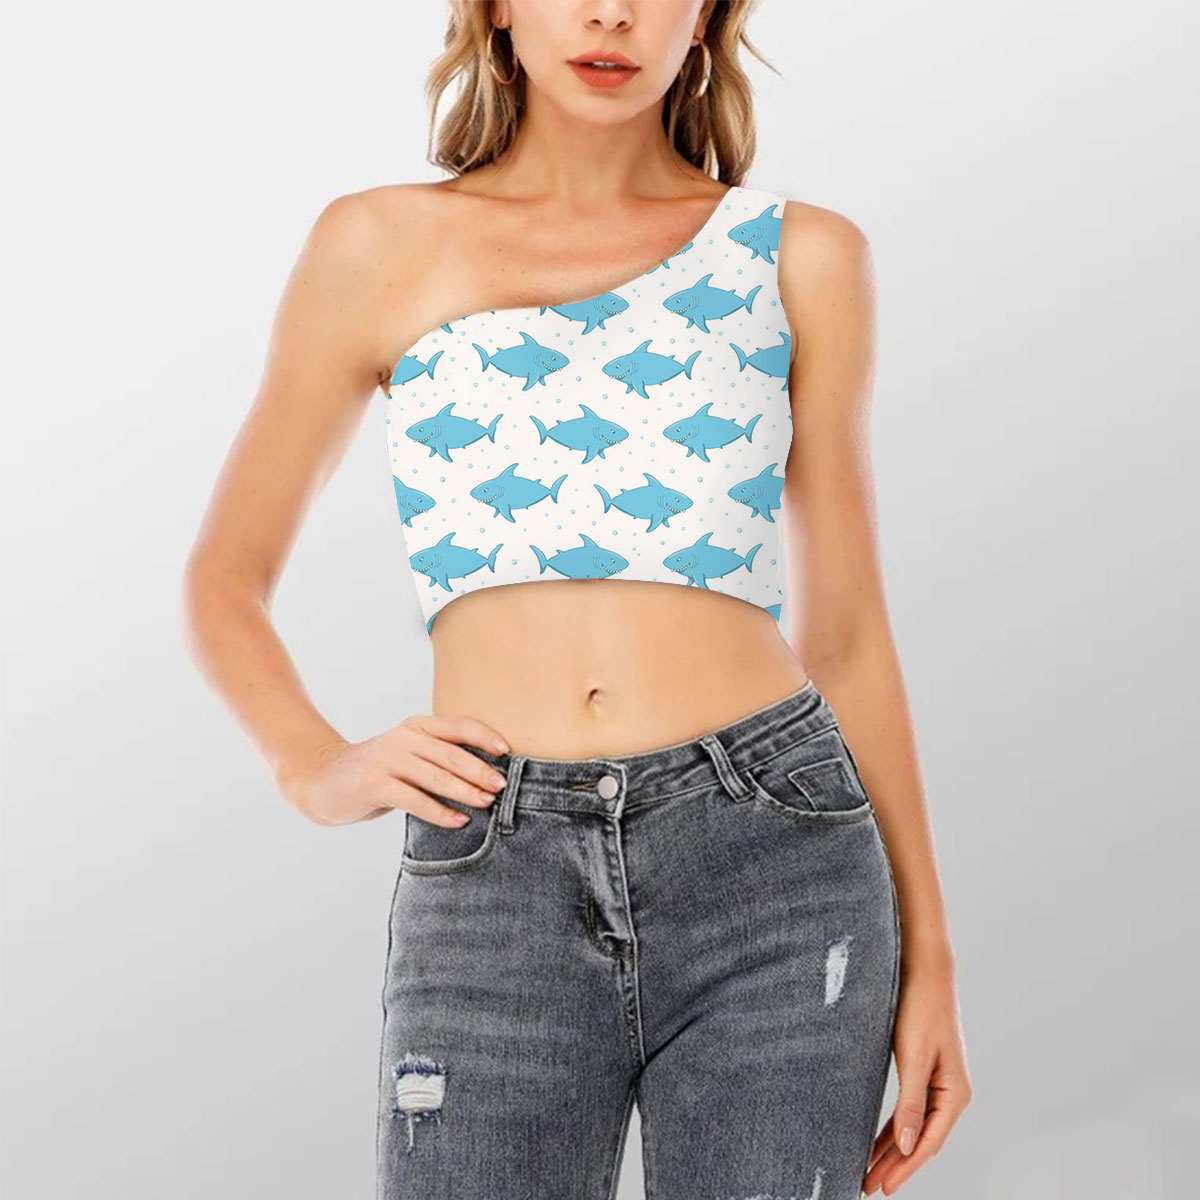 Funny Cartoon Great White Shark Shoulder Cropped Top